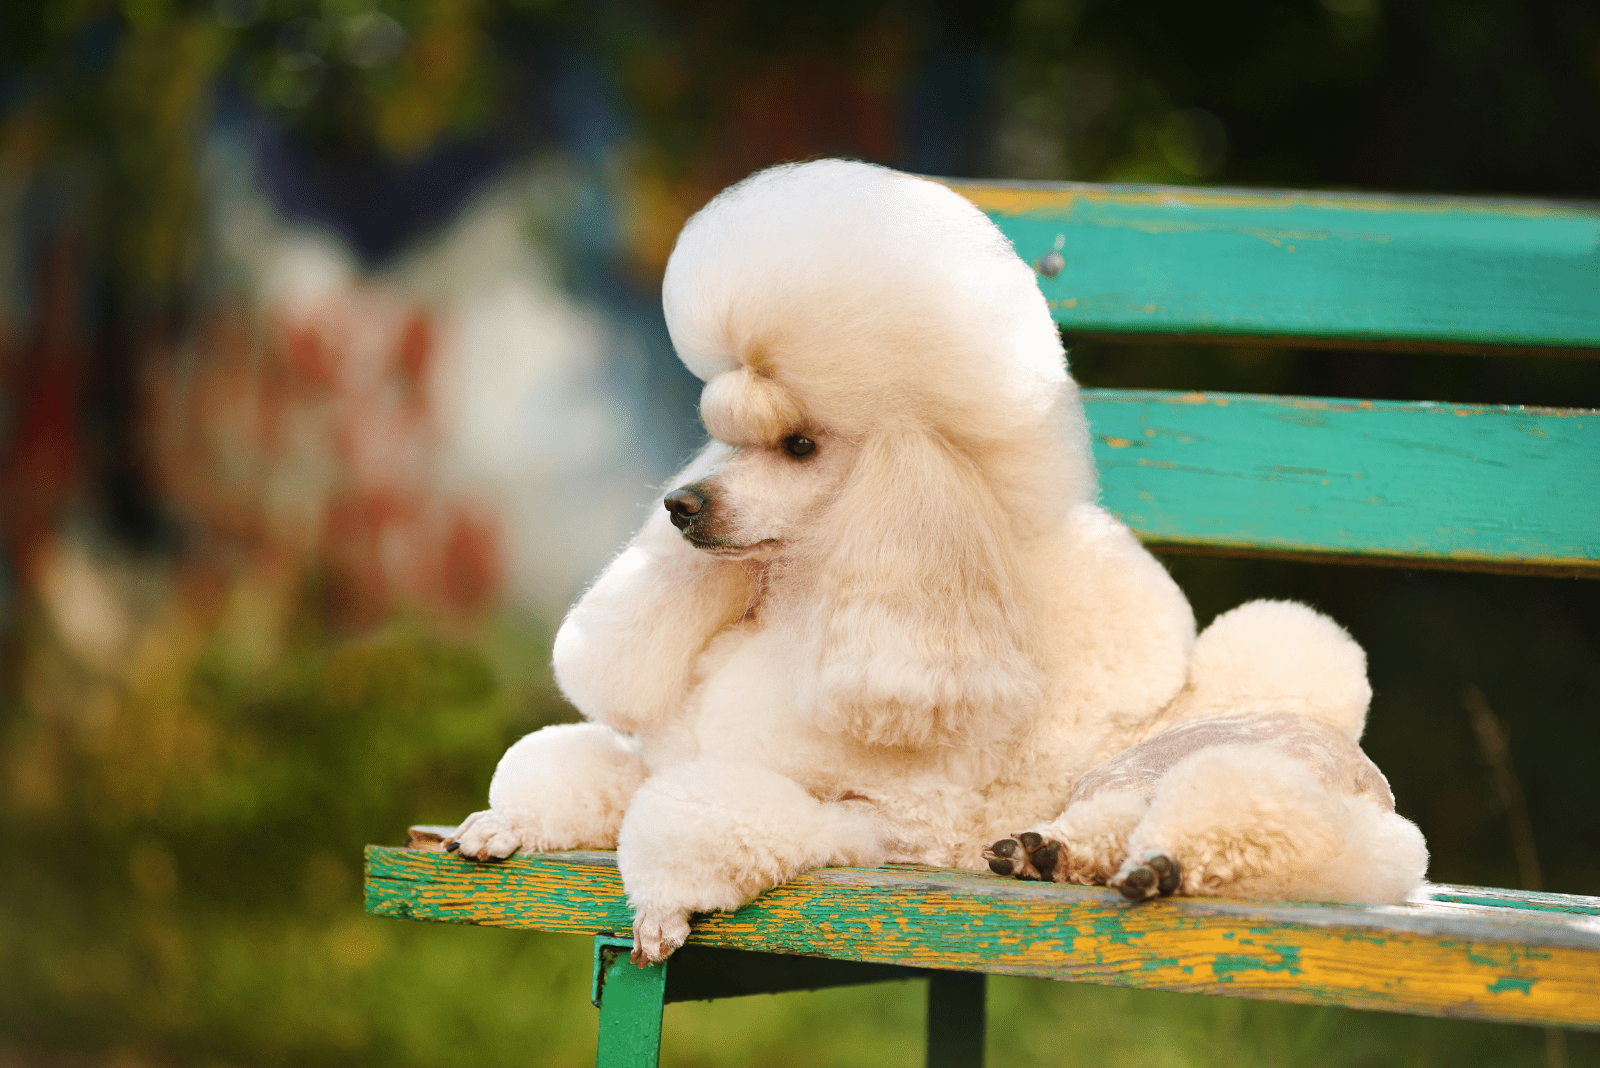 The poodle is lying on the bench